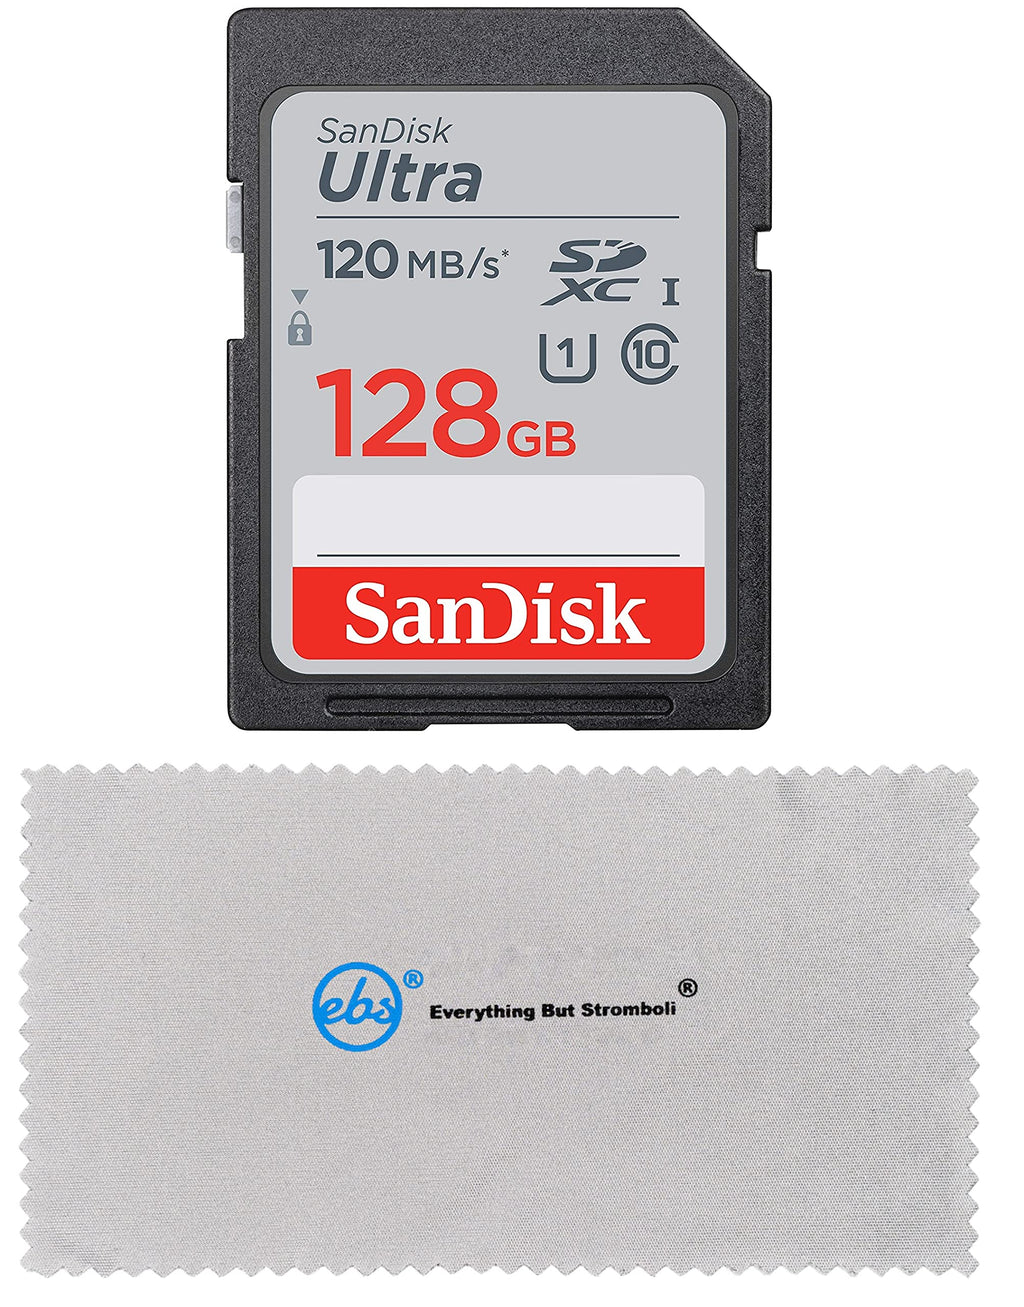 SanDisk 128GB SD Ultra Memory Card Works with Canon EOS M200, M100, M50, M5, M6 Mirrorless Camera (SDSDUN4-128G-GN6IN) Bundle with (1) Everything But Stromboli Micro Fiber Cloth Class 10 128GB